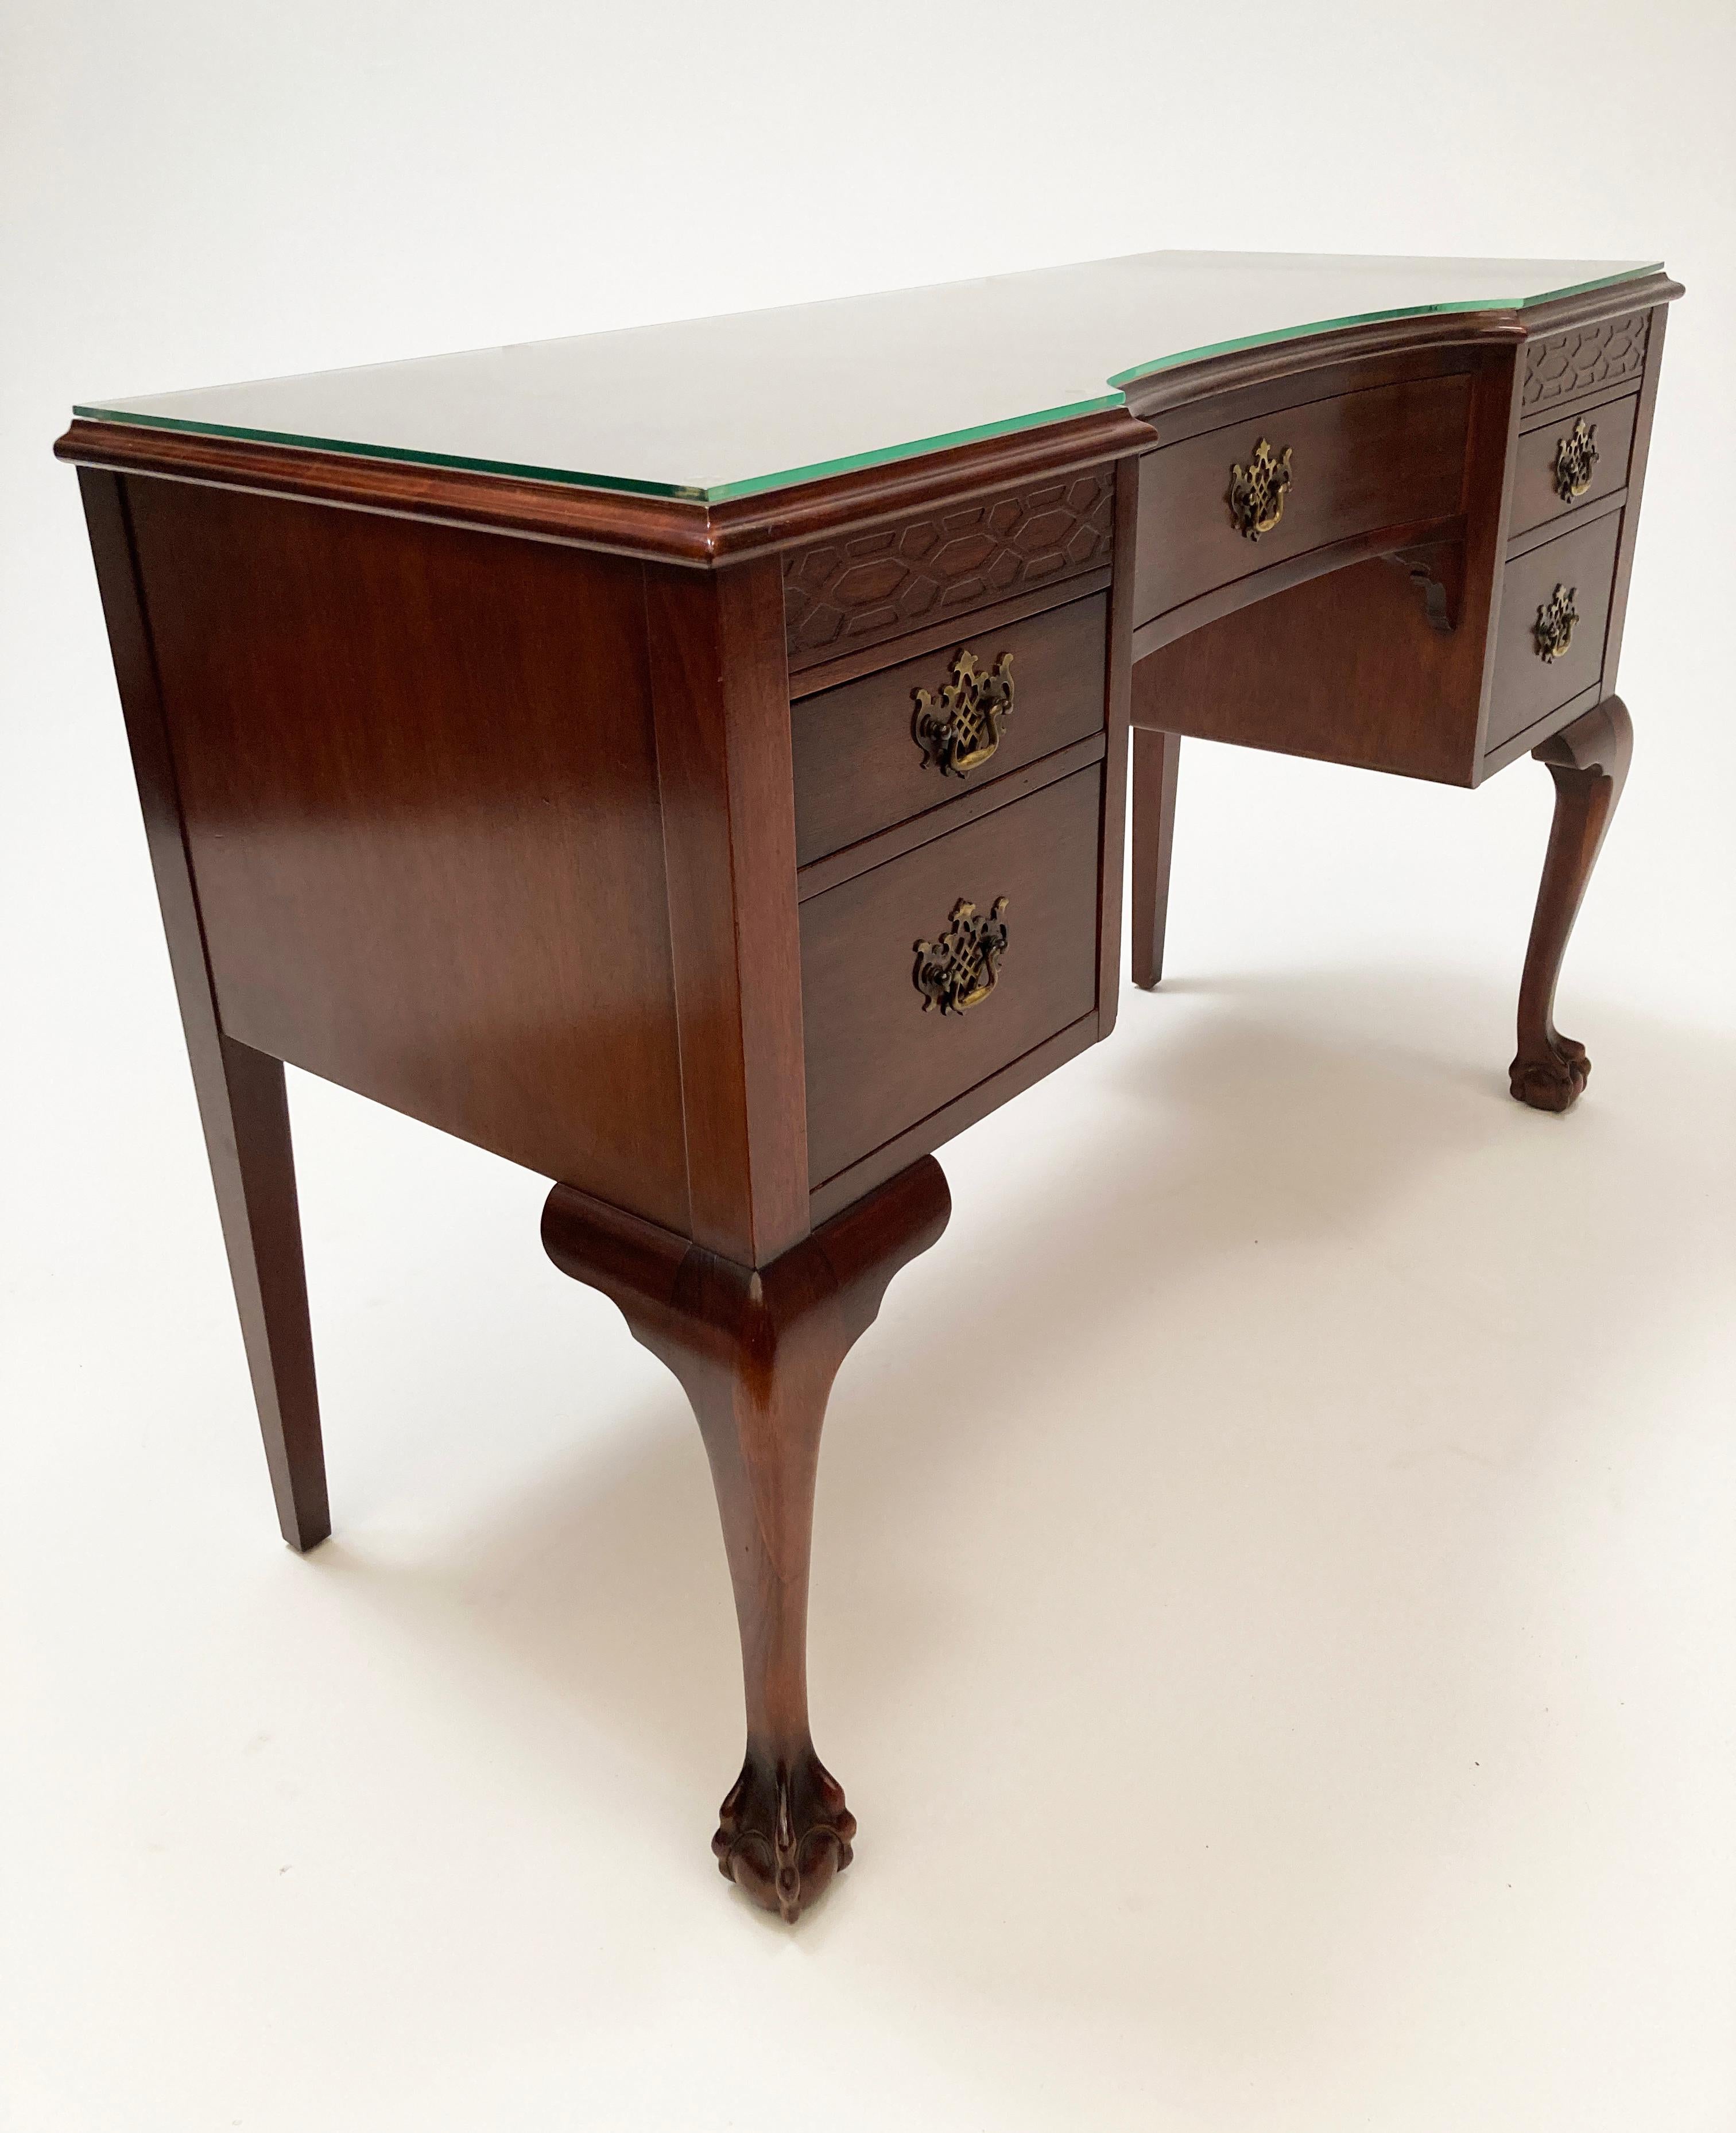 This a gem is a perfect smaller writing desk that lends itself to so many room layouts. As opposed to many larger desks that require ample space, this desk is far more versatile than most. And, the design is nothing short of magnificent. Done in a